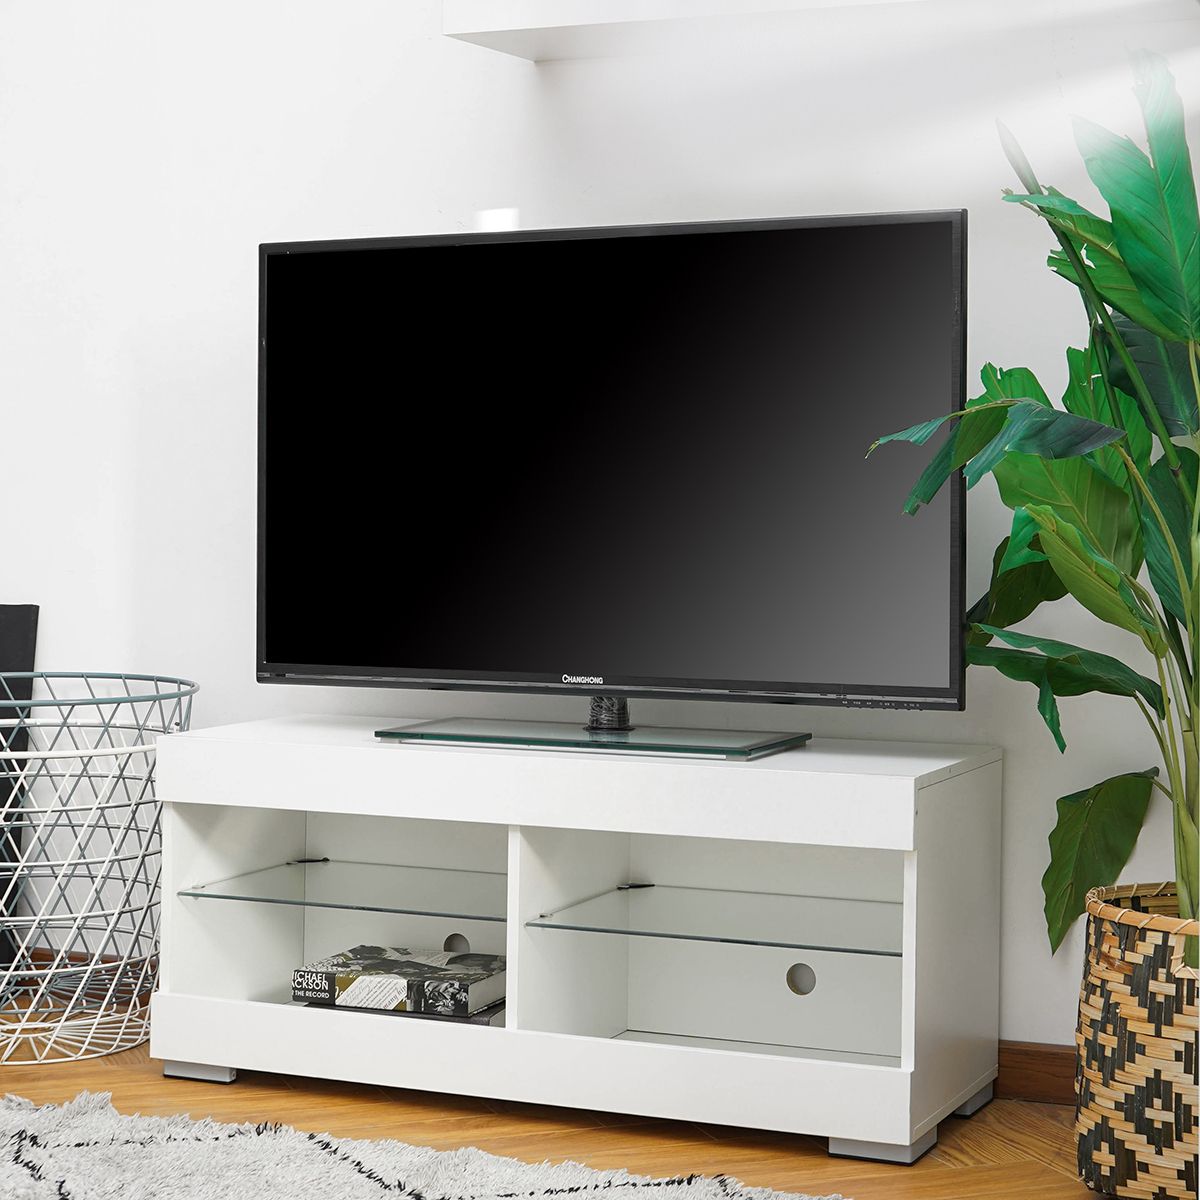 Wood Television Stand Modern Tv Stand Cabinet With Led Inside Modern Wood Tv Stands (View 1 of 15)